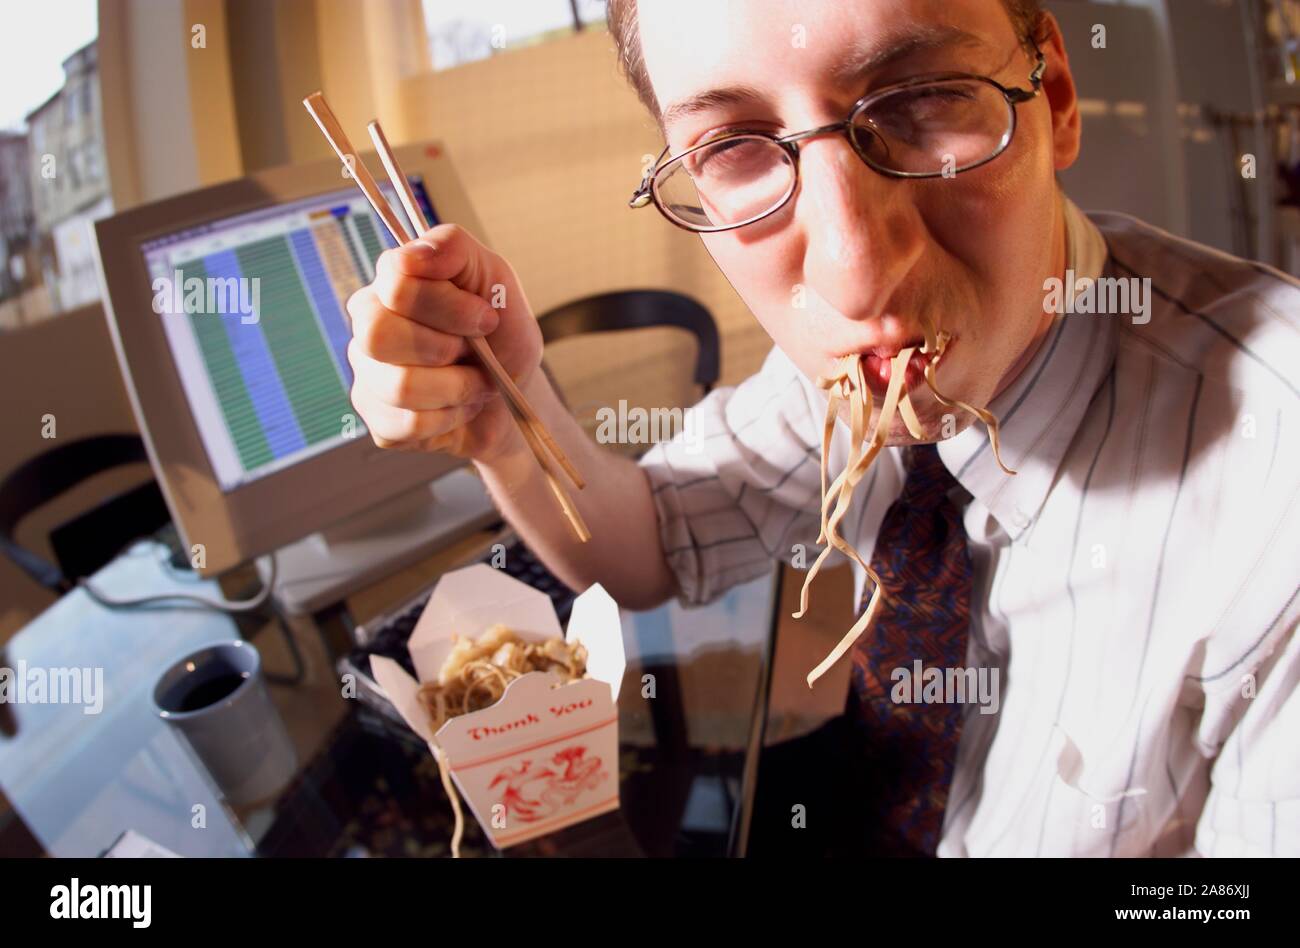 A Caucasian male office worker stuffing his face with Chinese takeout lo mein Stock Photo